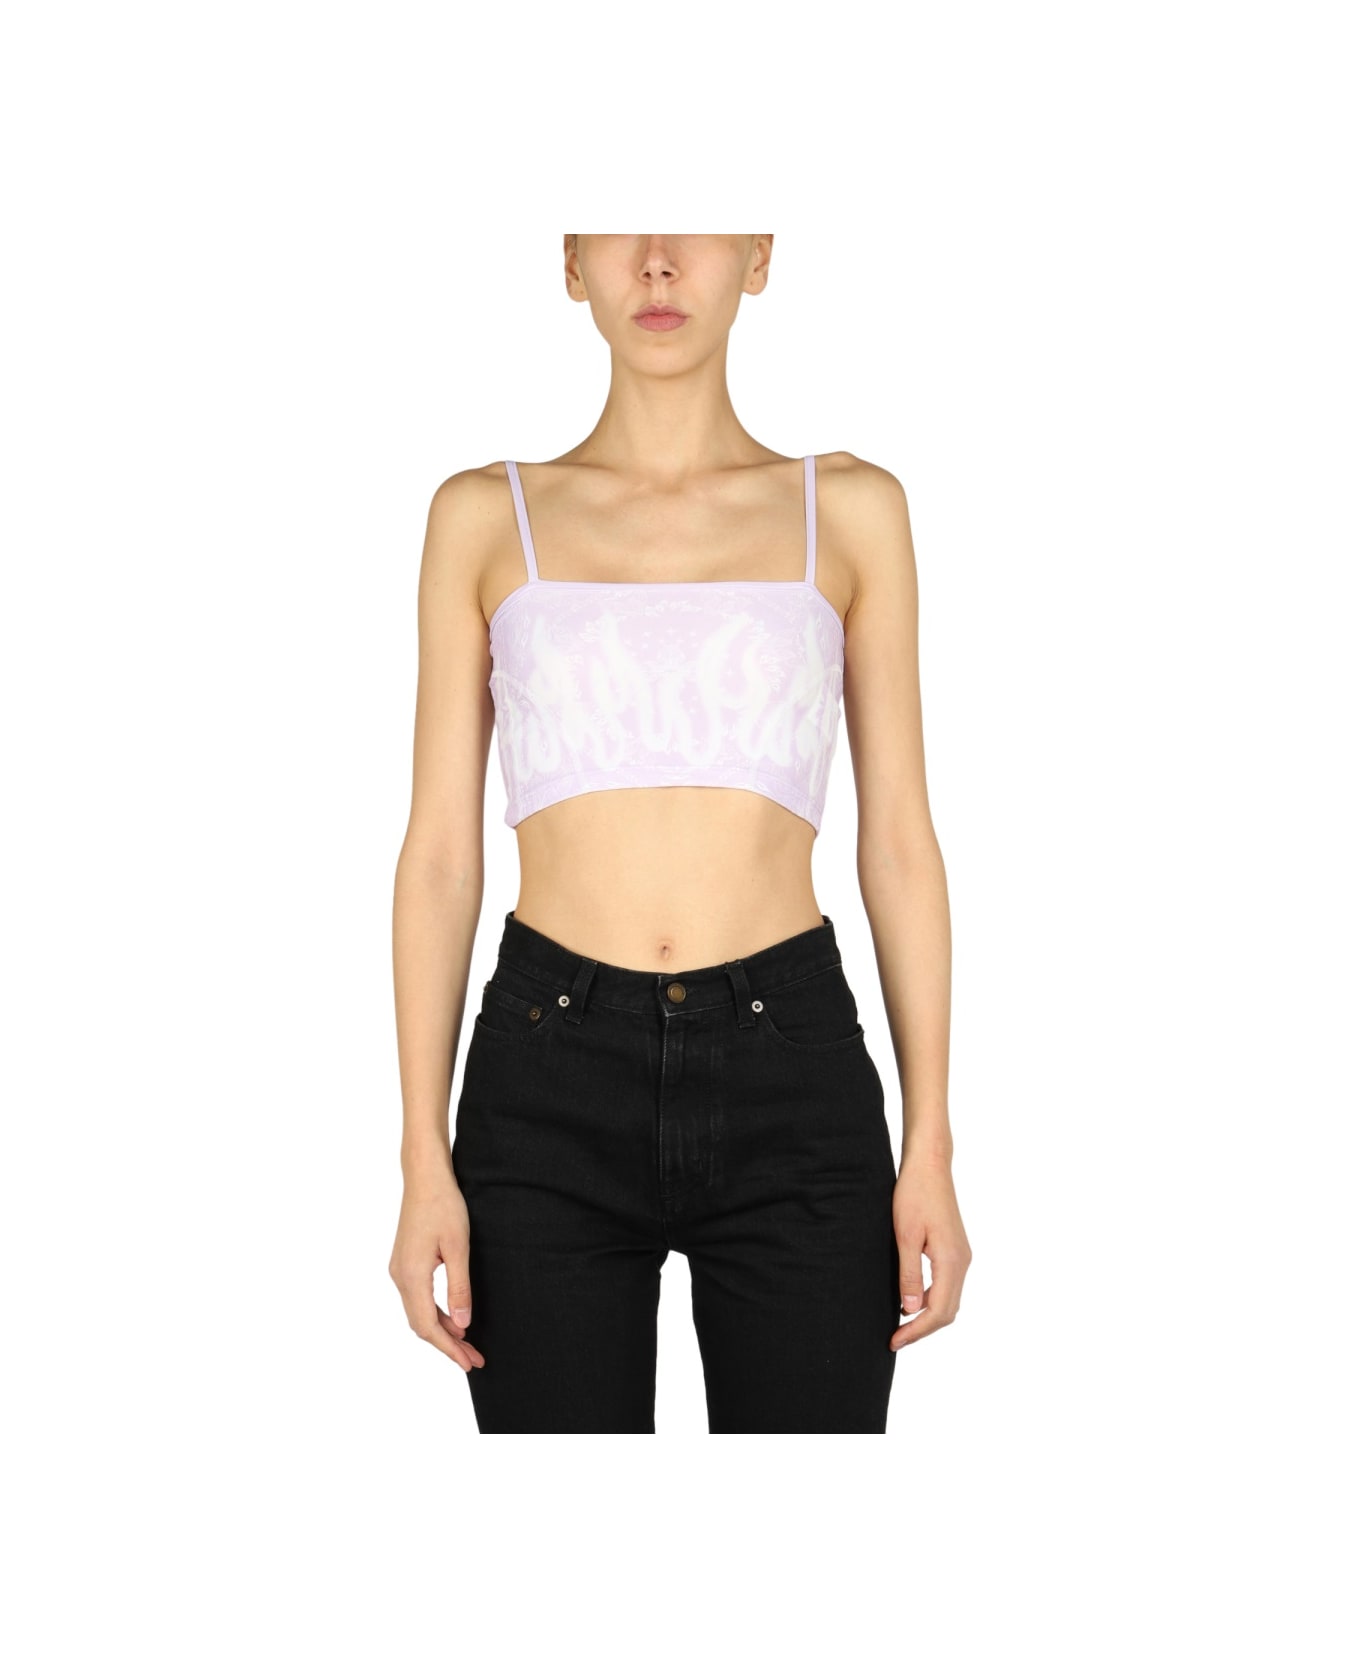 Vision of Super Top Cropped - LILAC トップス